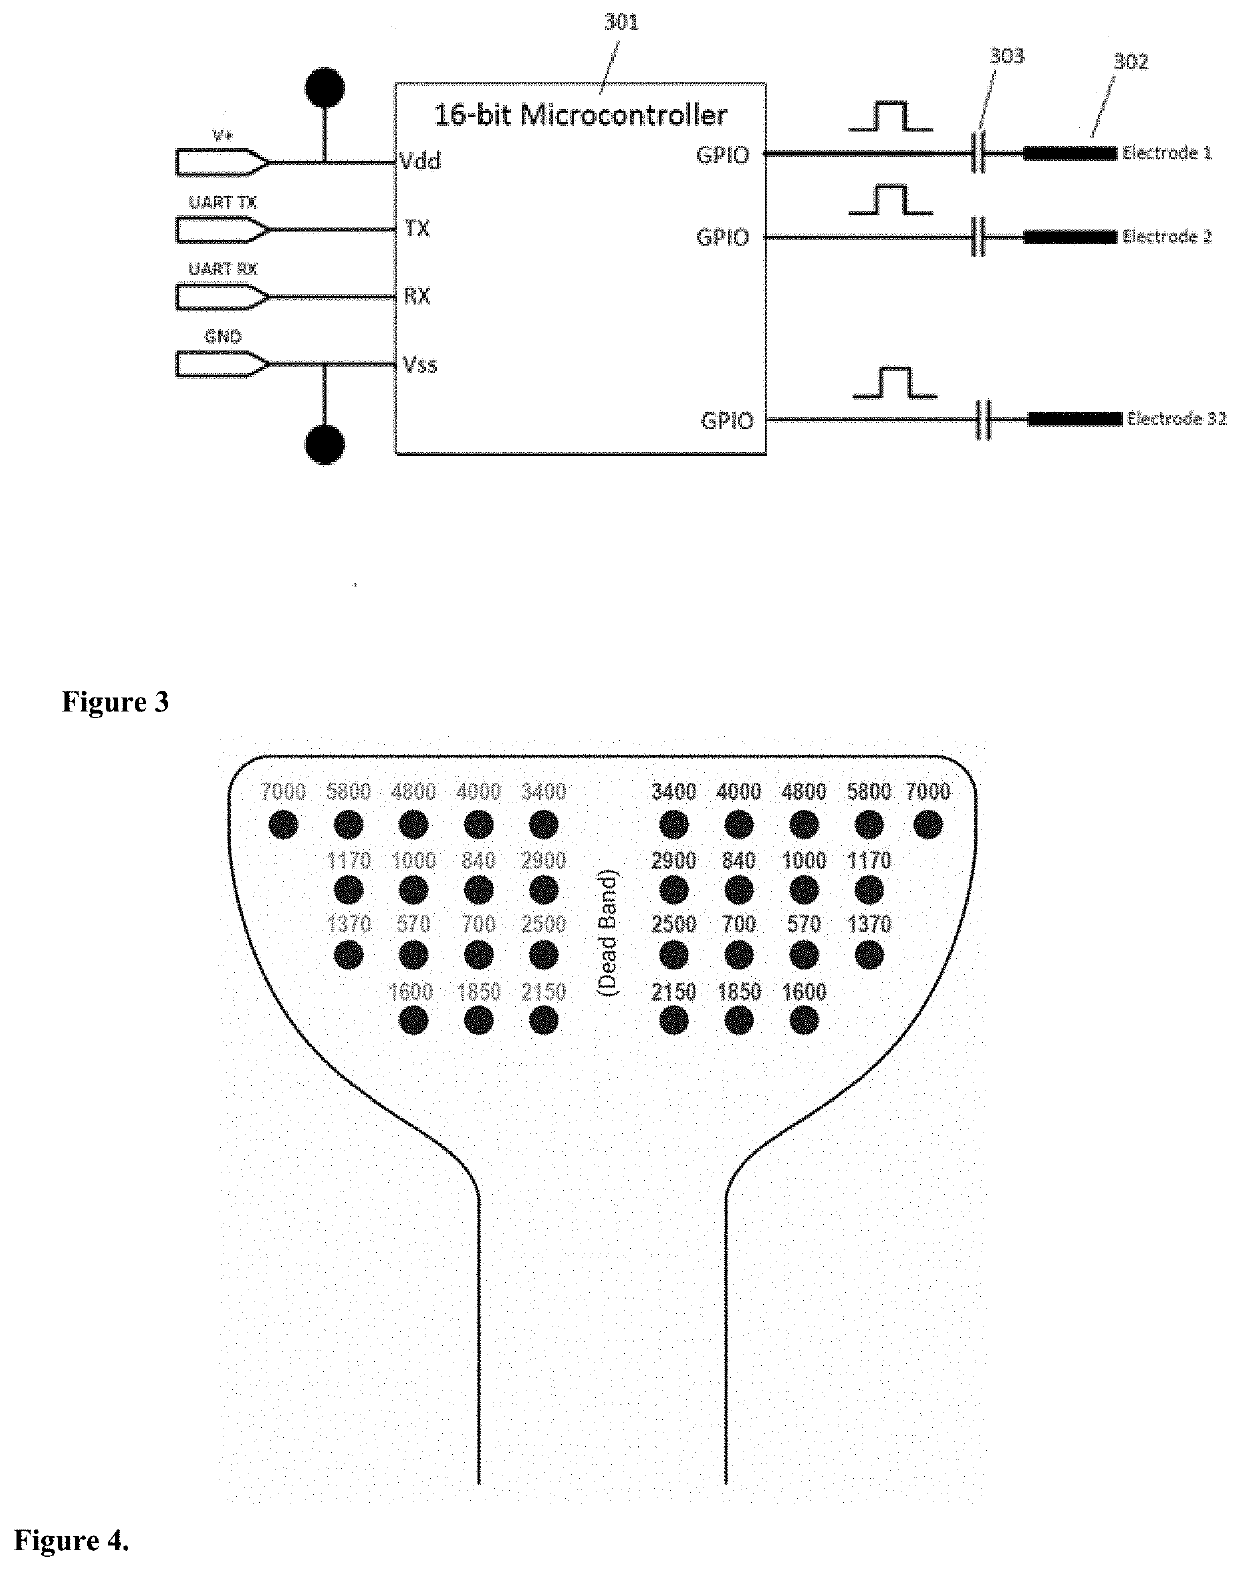 Method and apparatus for treating a neurological disorder